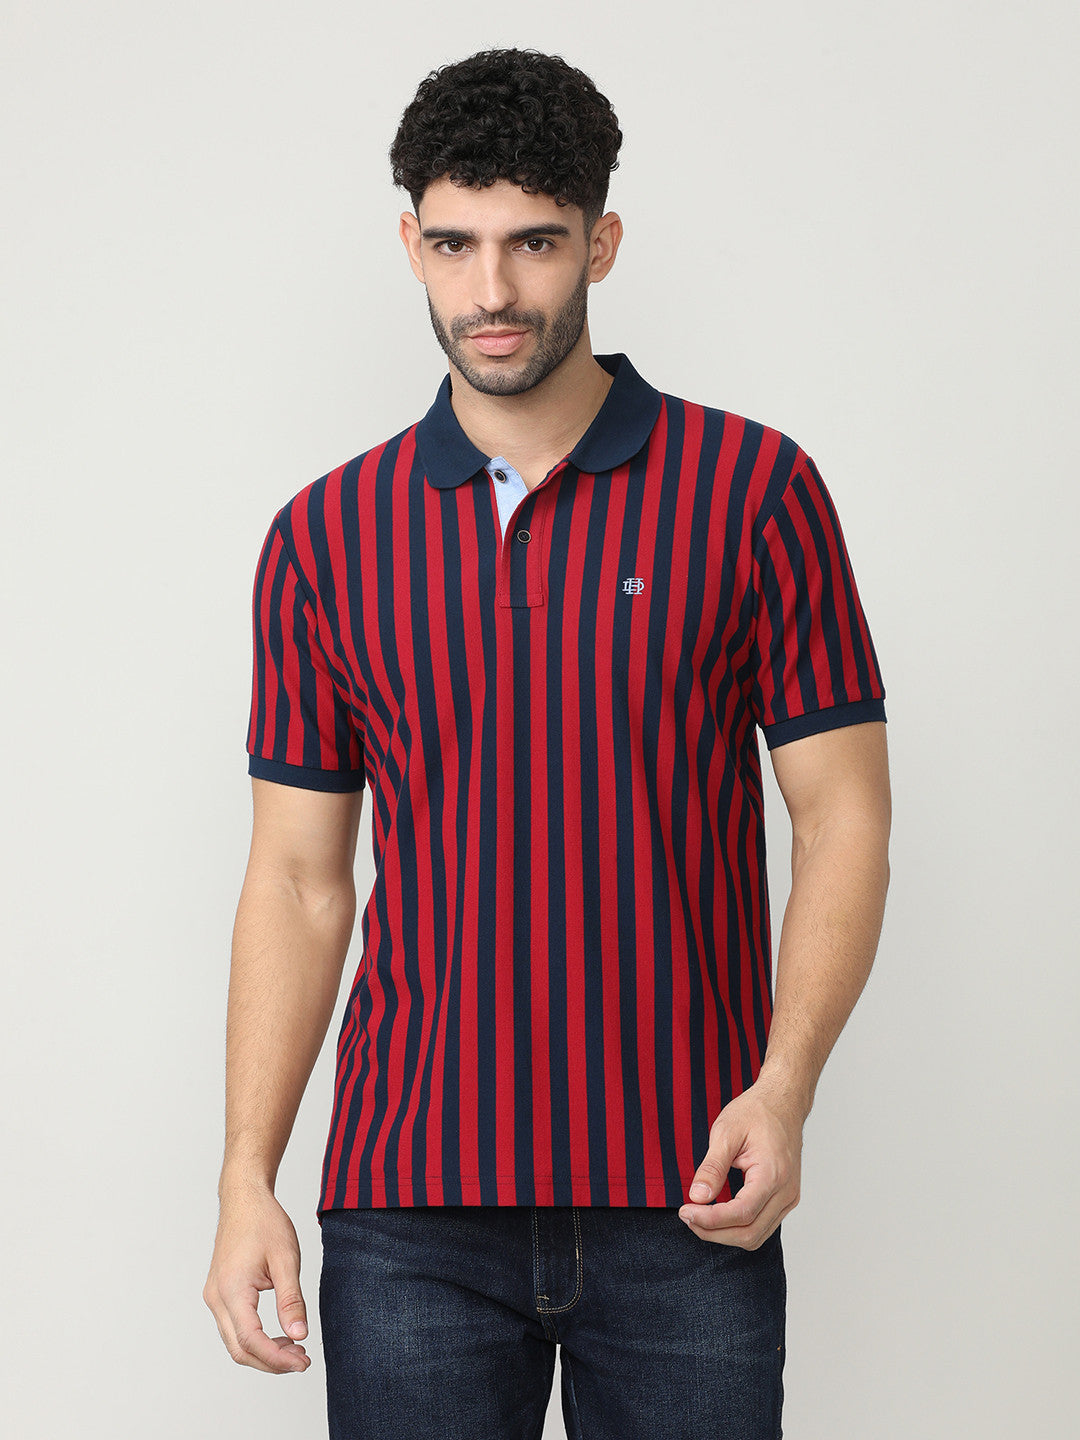 Deep Red Pique Lycra Verticle Stripes Polo T-shirt With Constrast Collar